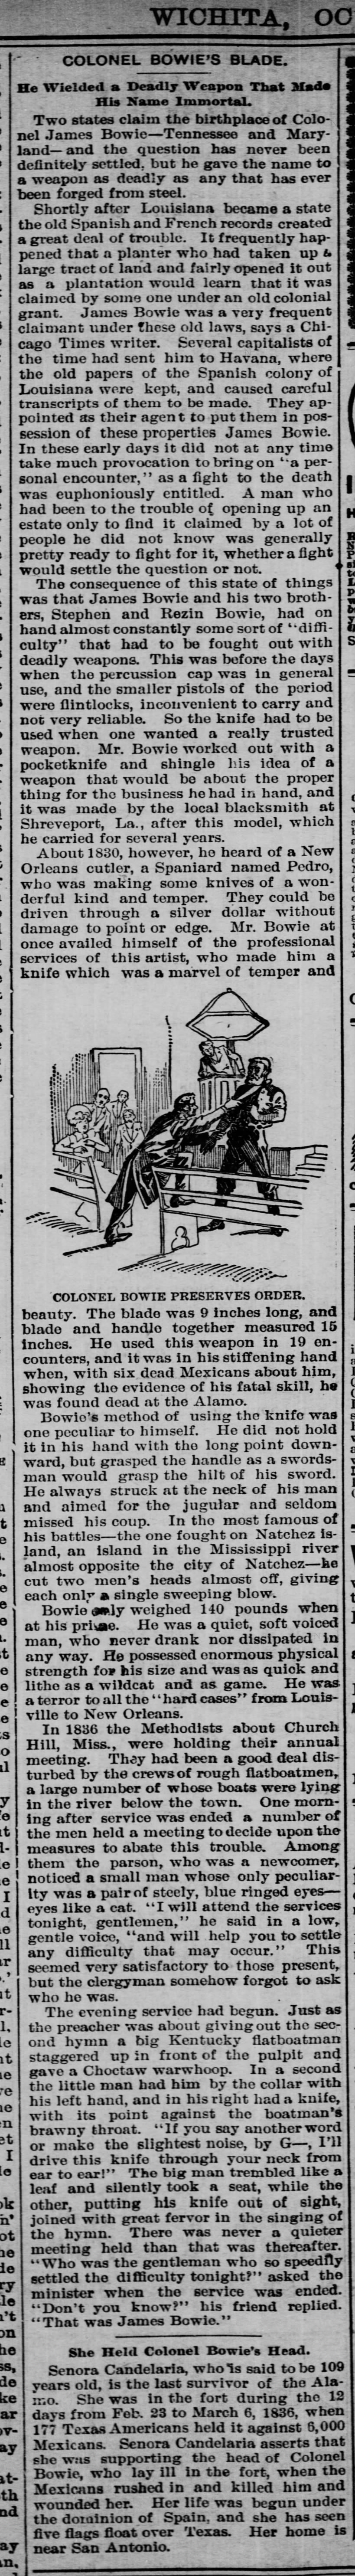 The Wichita Beacon (KS) October 22, 1894 Col. Bowie's Blade, Candalaria